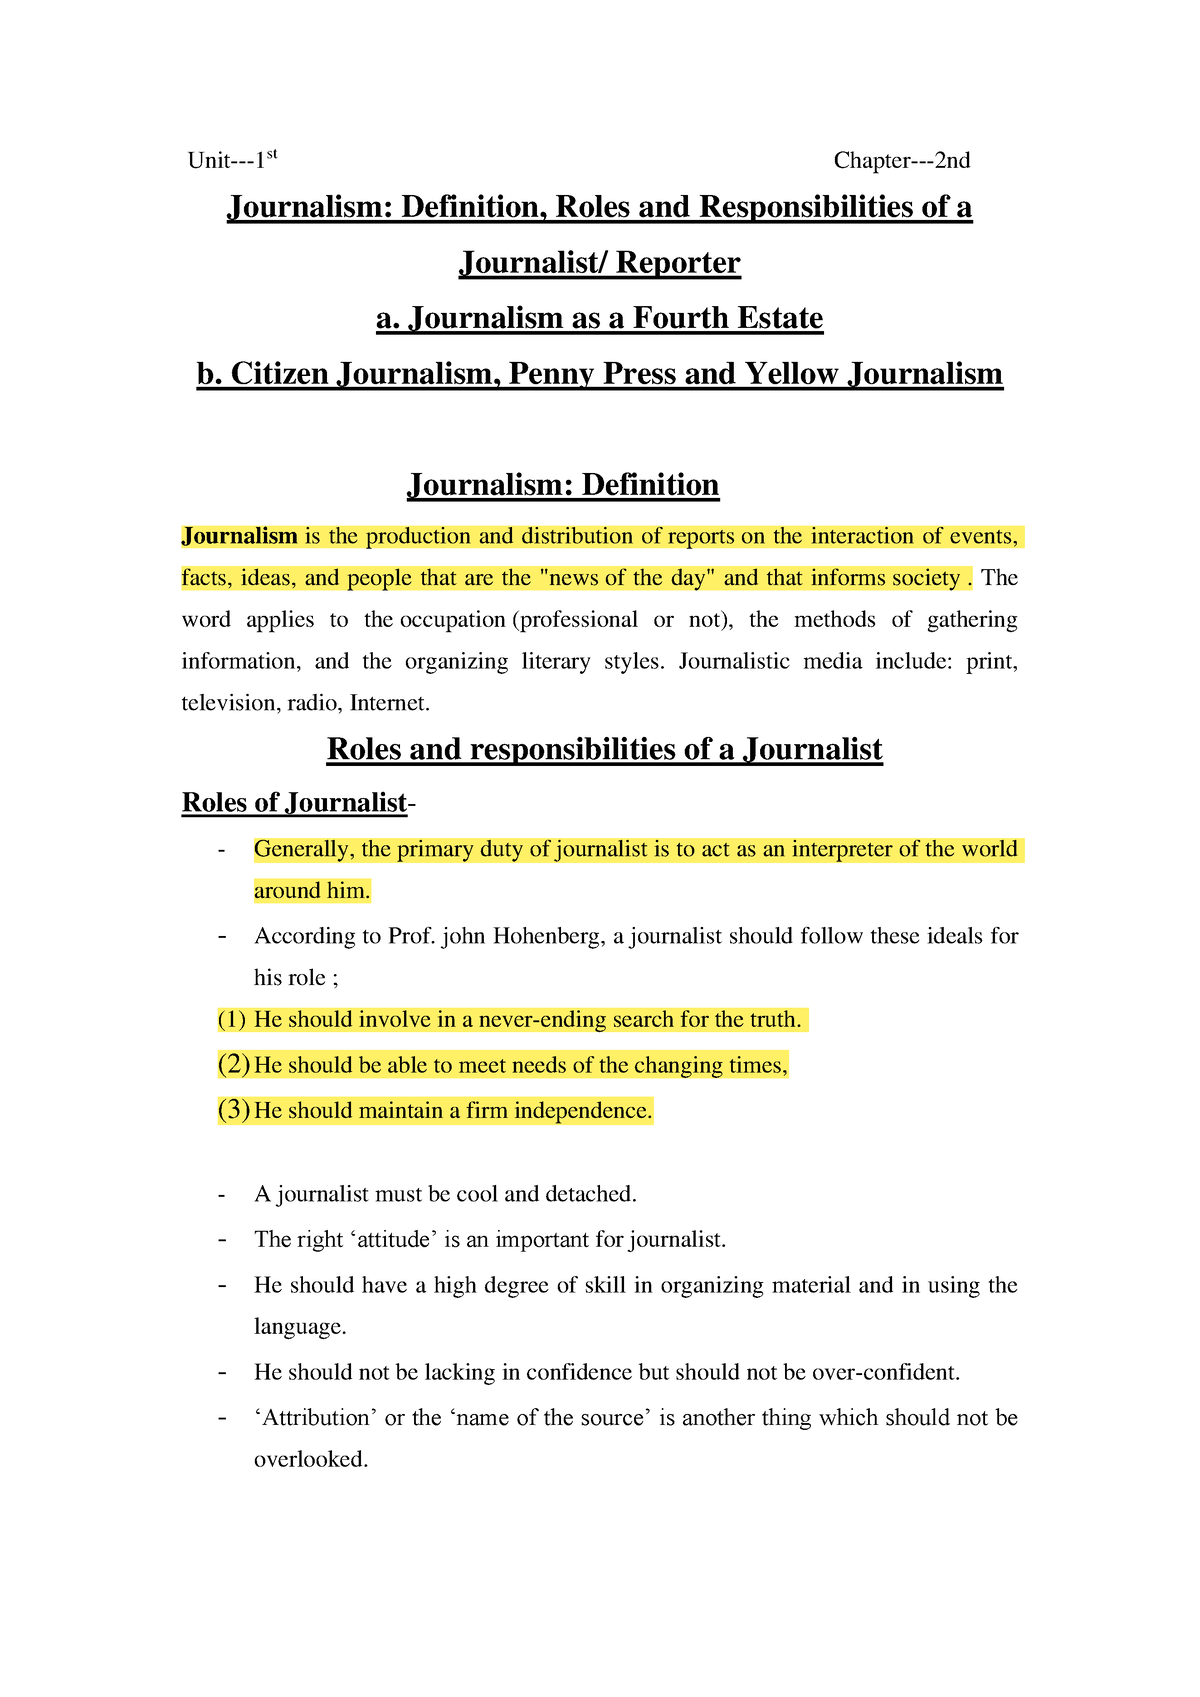 Journalism Definition - Unit-1st Chapter-2nd Journalism: Definition, Roles  and Responsibilities of a - Studocu